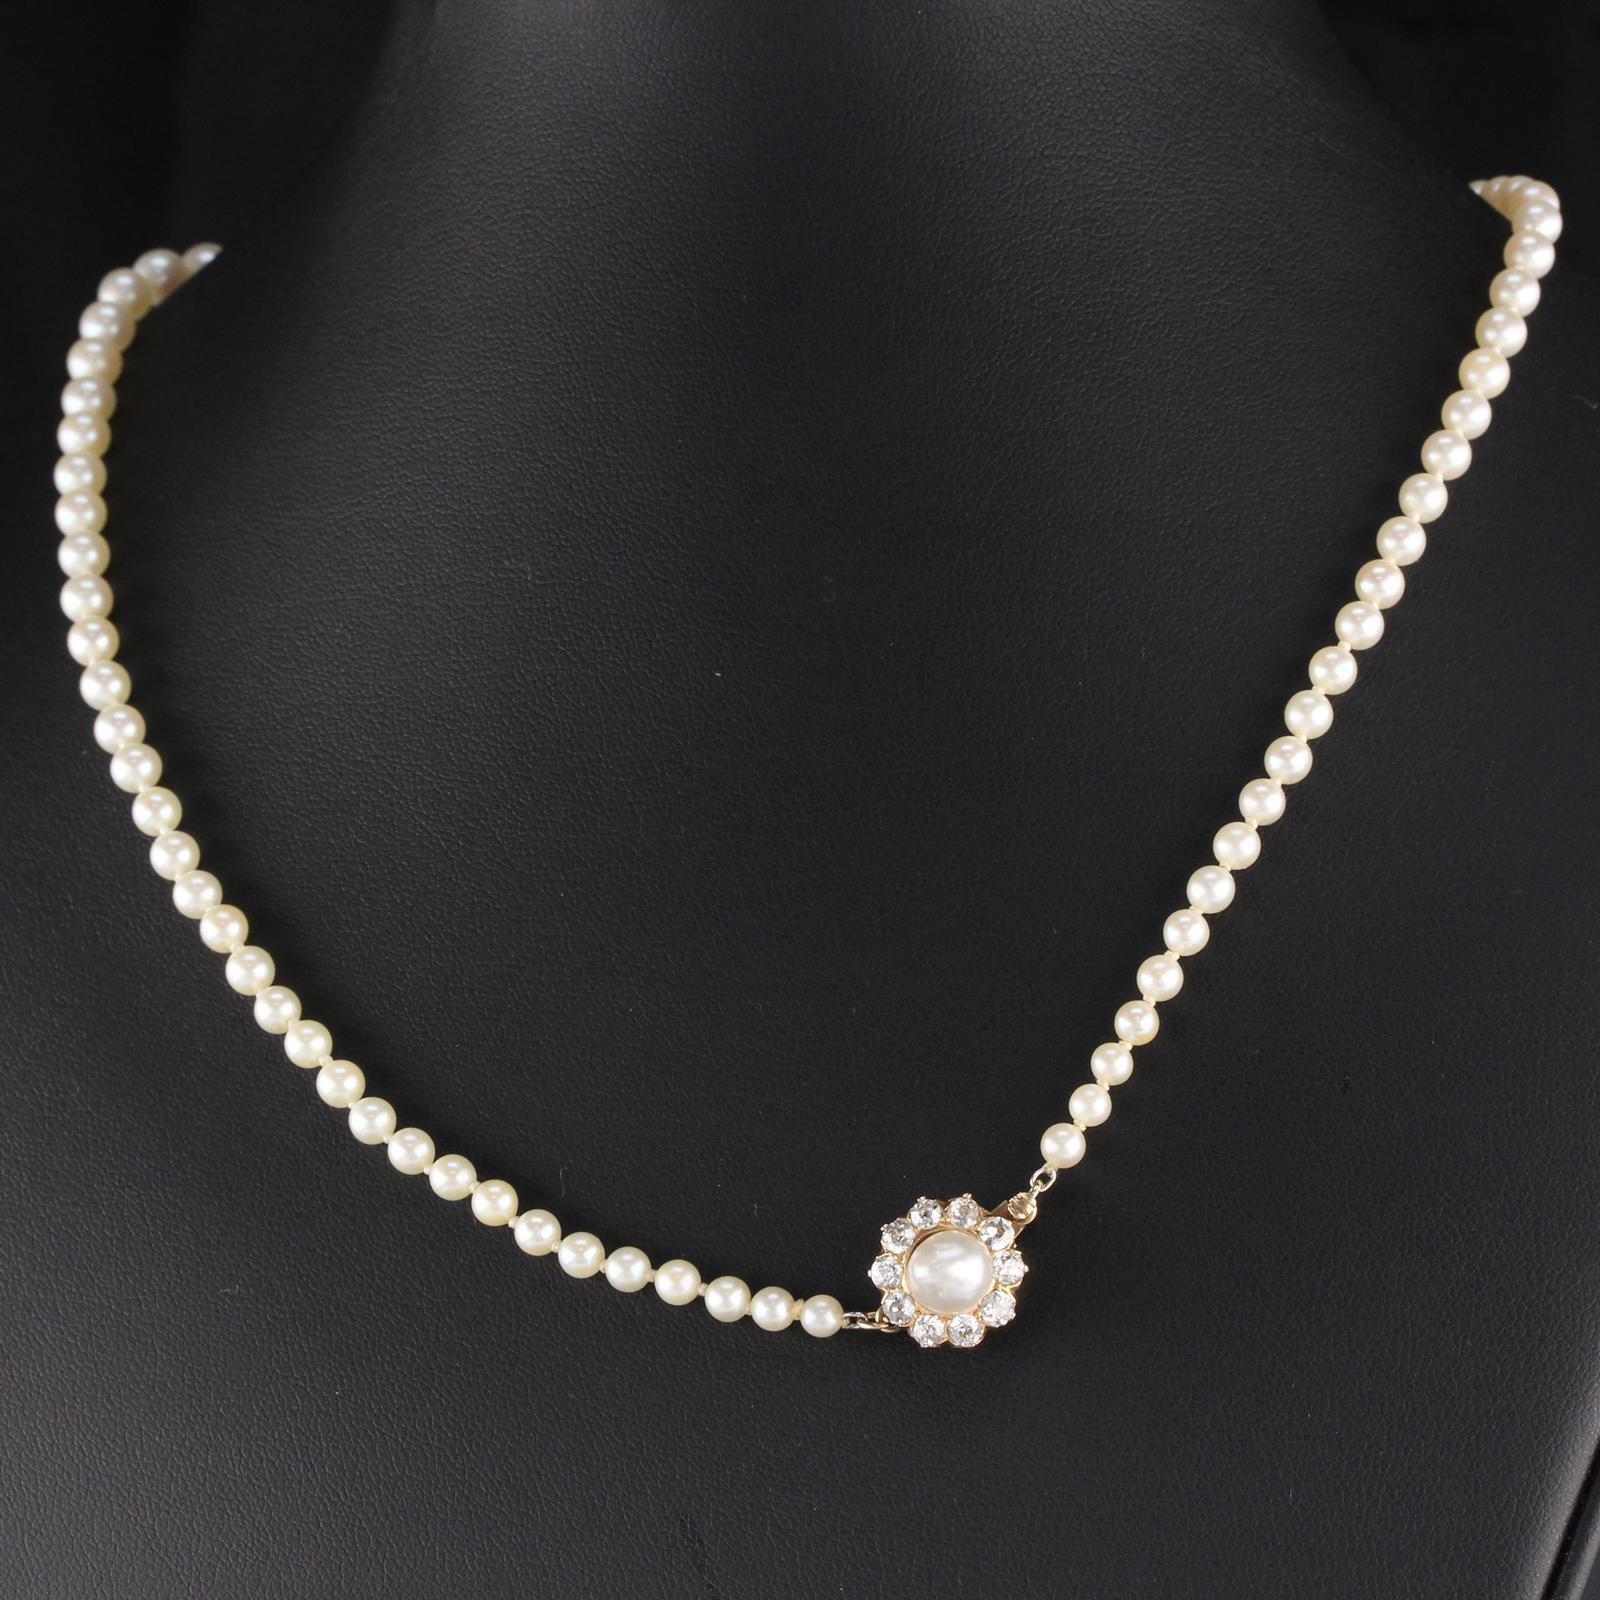 Vintage GIA Certified Pearl Necklace includes 83 graduated cultured pearls ranging from 3.6mm to 7.69mm. The clasp is 14 karat yellow gold with one natural pearl (Pinctada Fucata, akoya pearl oyster) center surrounded by ten old- European brilliant